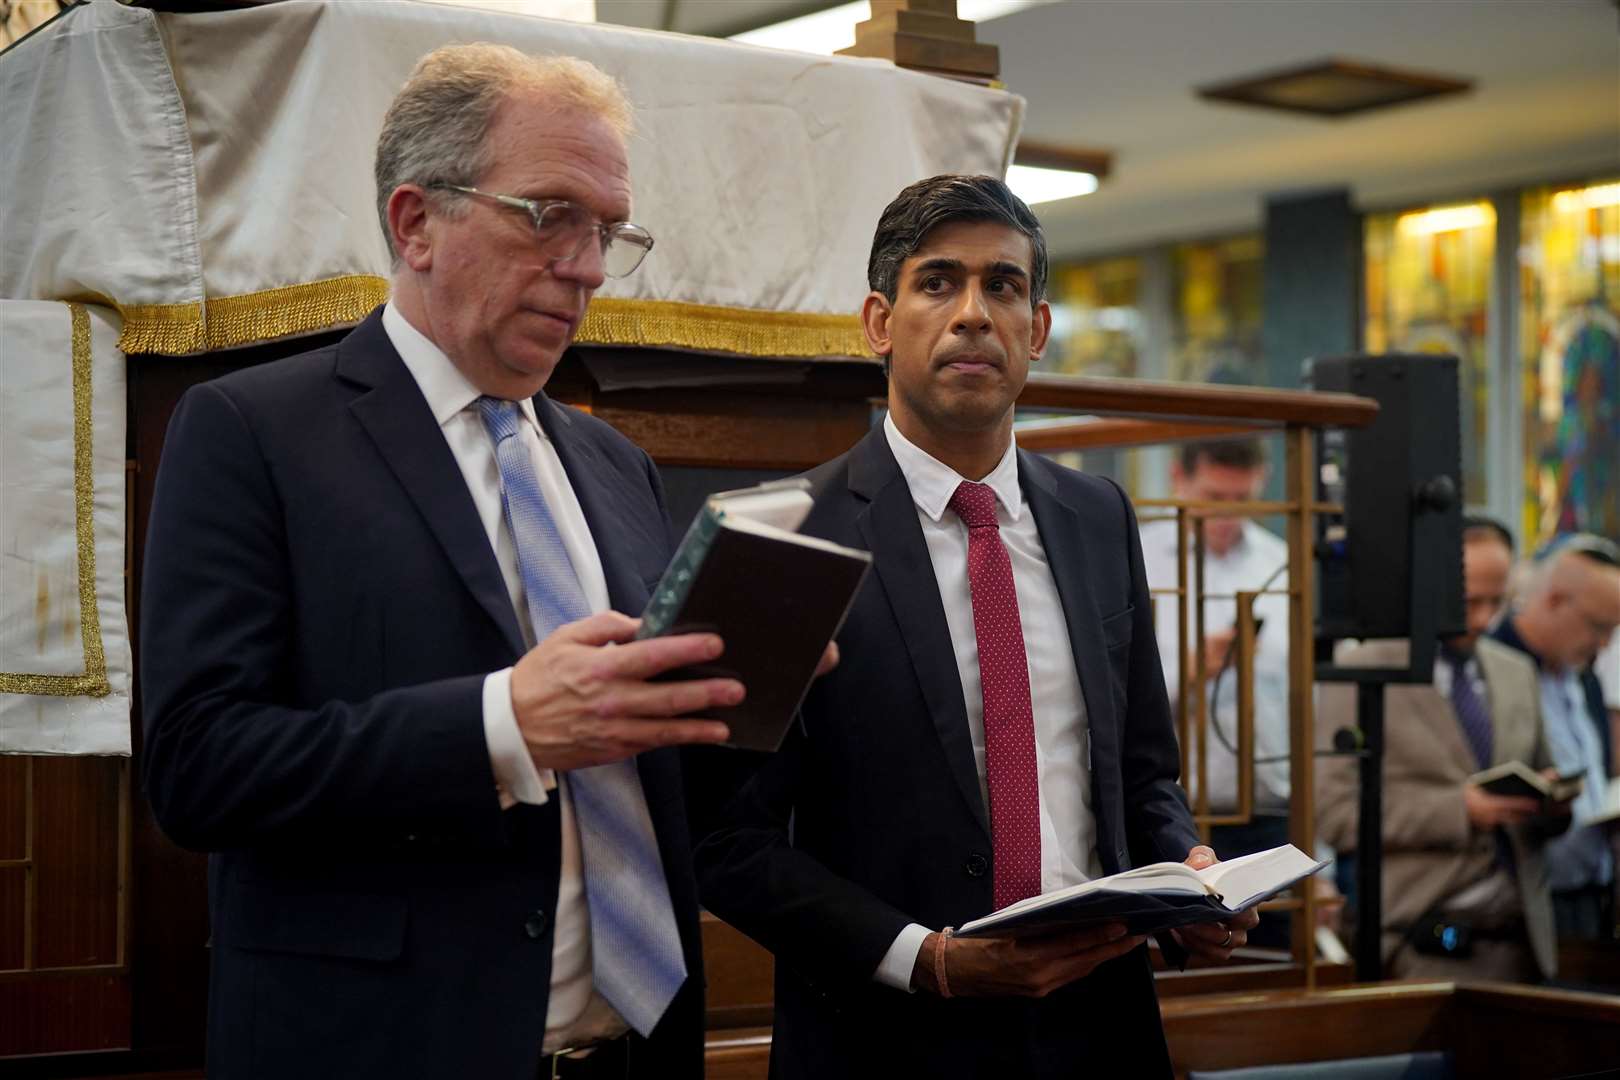 Prime Minister Rishi Sunak visited a synagogue on Monday to join in with prayers for victims of the Hamas attack (PA)